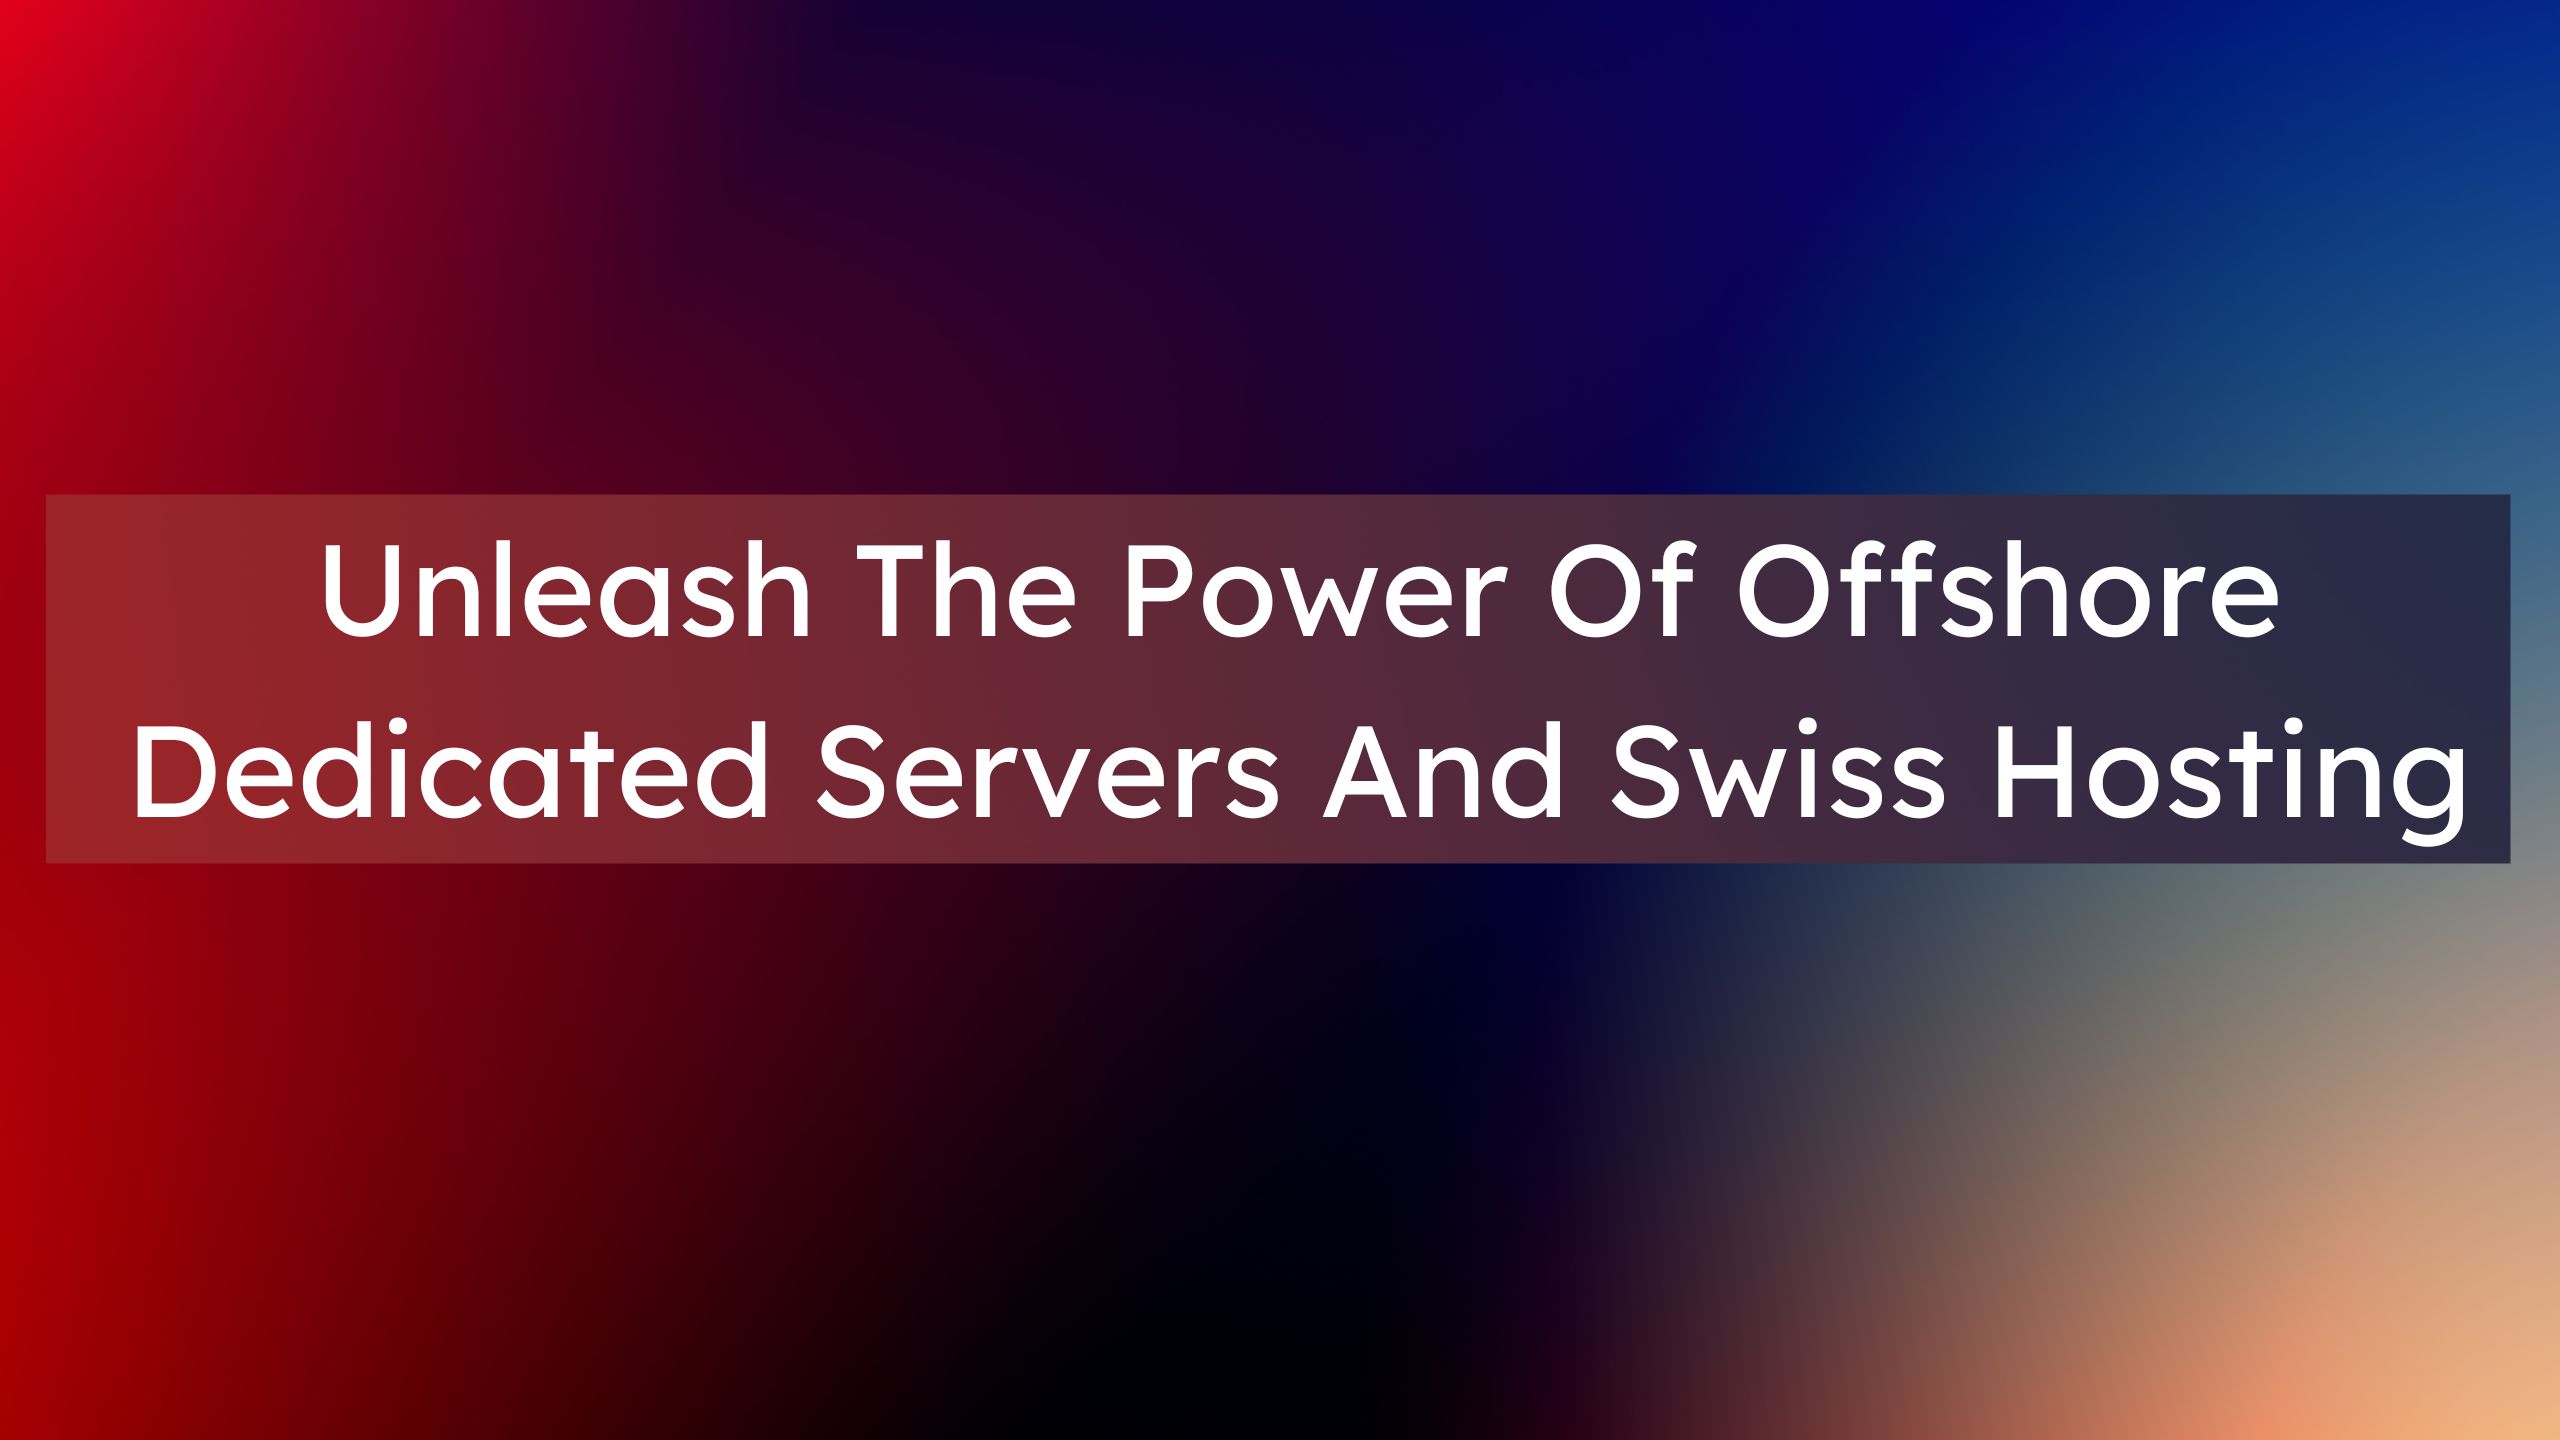 Unleash the Power of Offshore Dedicated Servers and Swiss Hosting